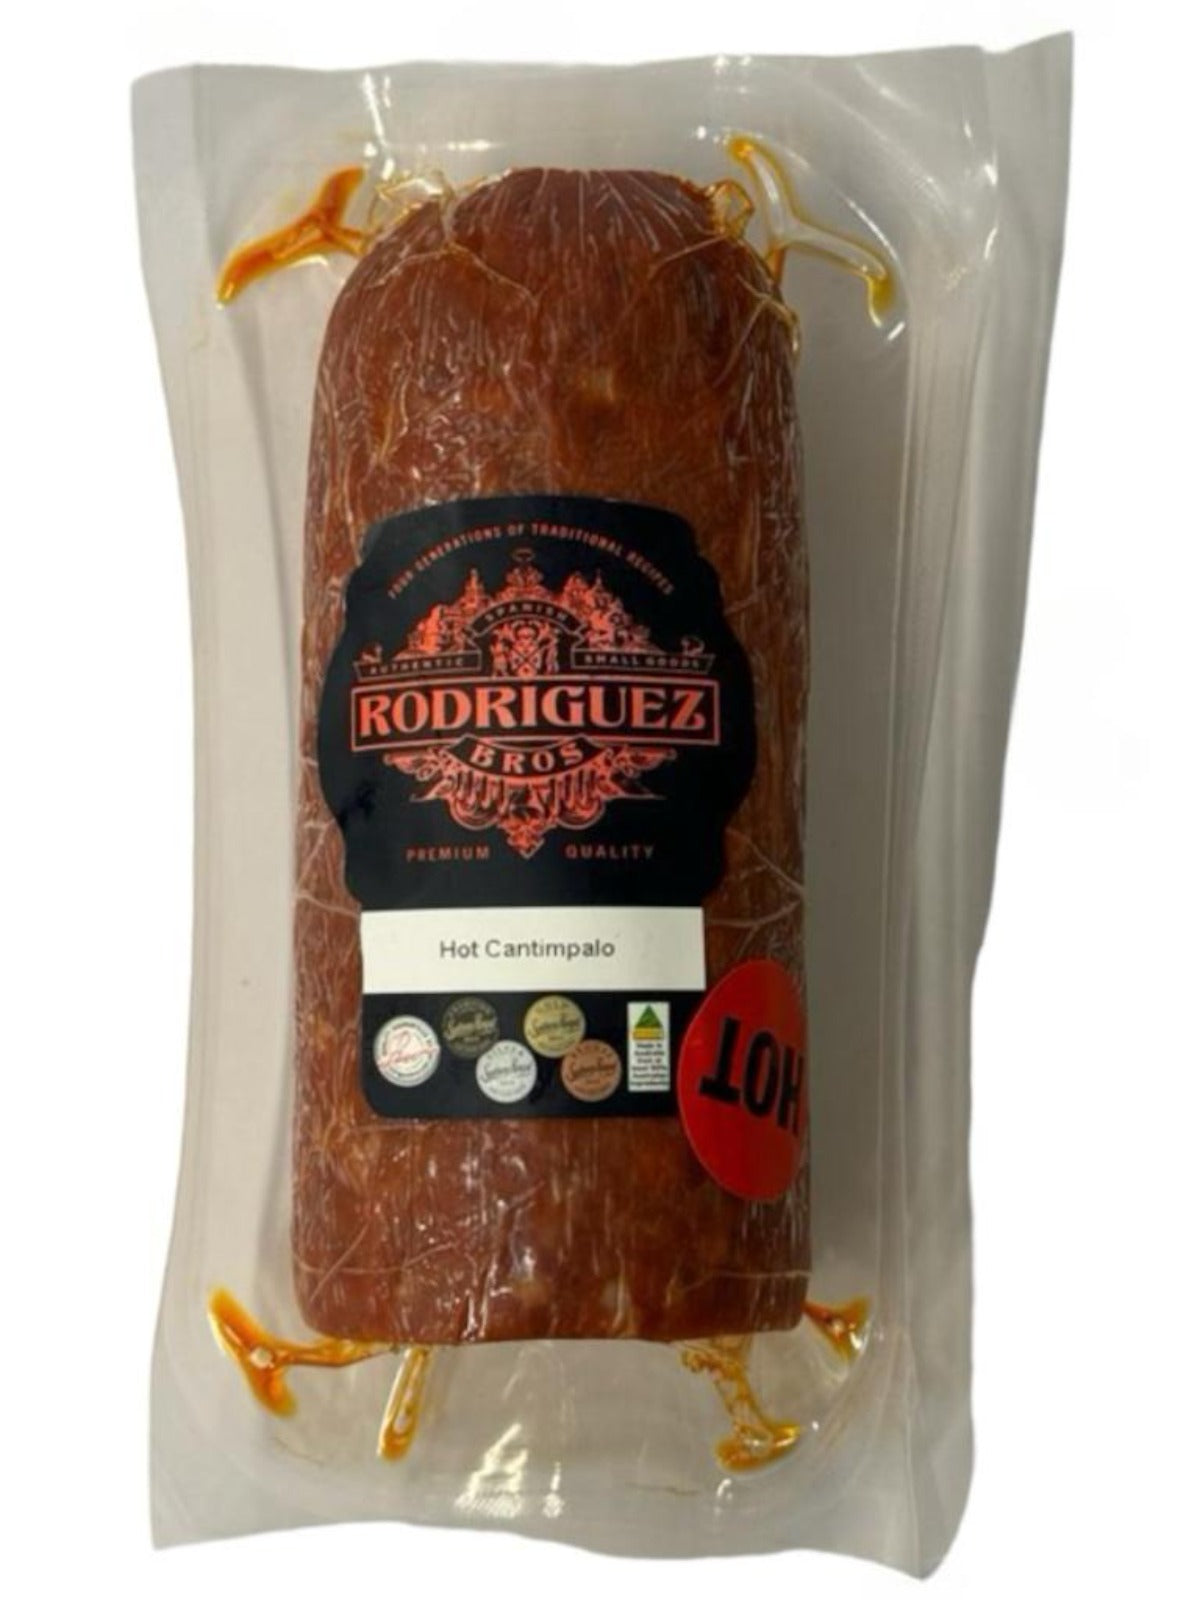 Hot Cantimpalo Half Salami Approx 400g random weight packet. Regular price $12.50 AUD [You are guaranteed to receive at least 390g of product, equivalent price of $32.05 per kg.]